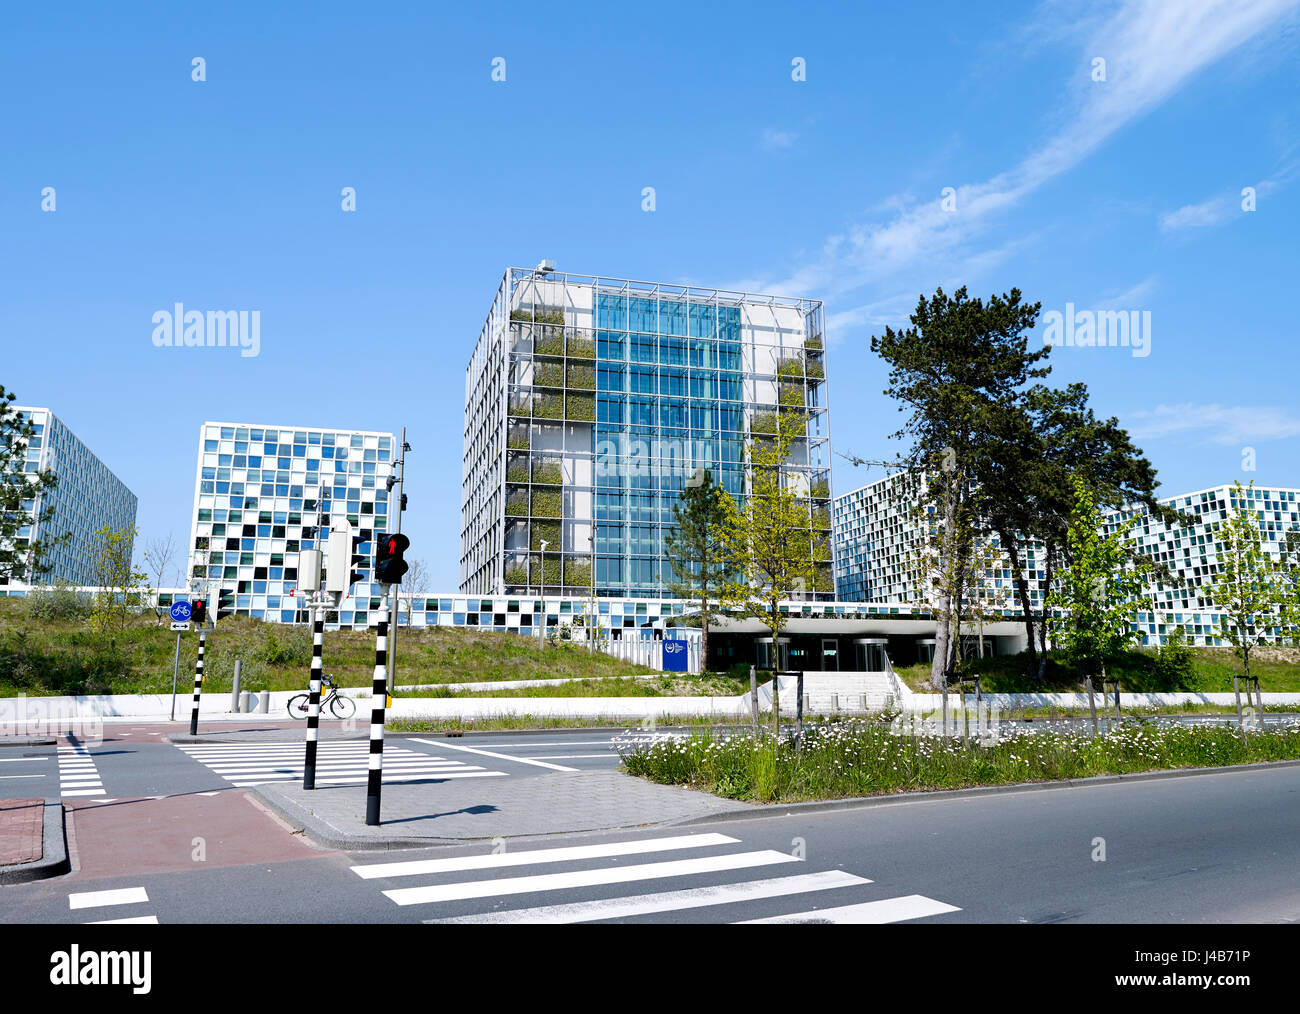 The International Criminal Court (ICC or ICCt) , intergovernmental organization and international tribunal,  in The Hague Stock Photo